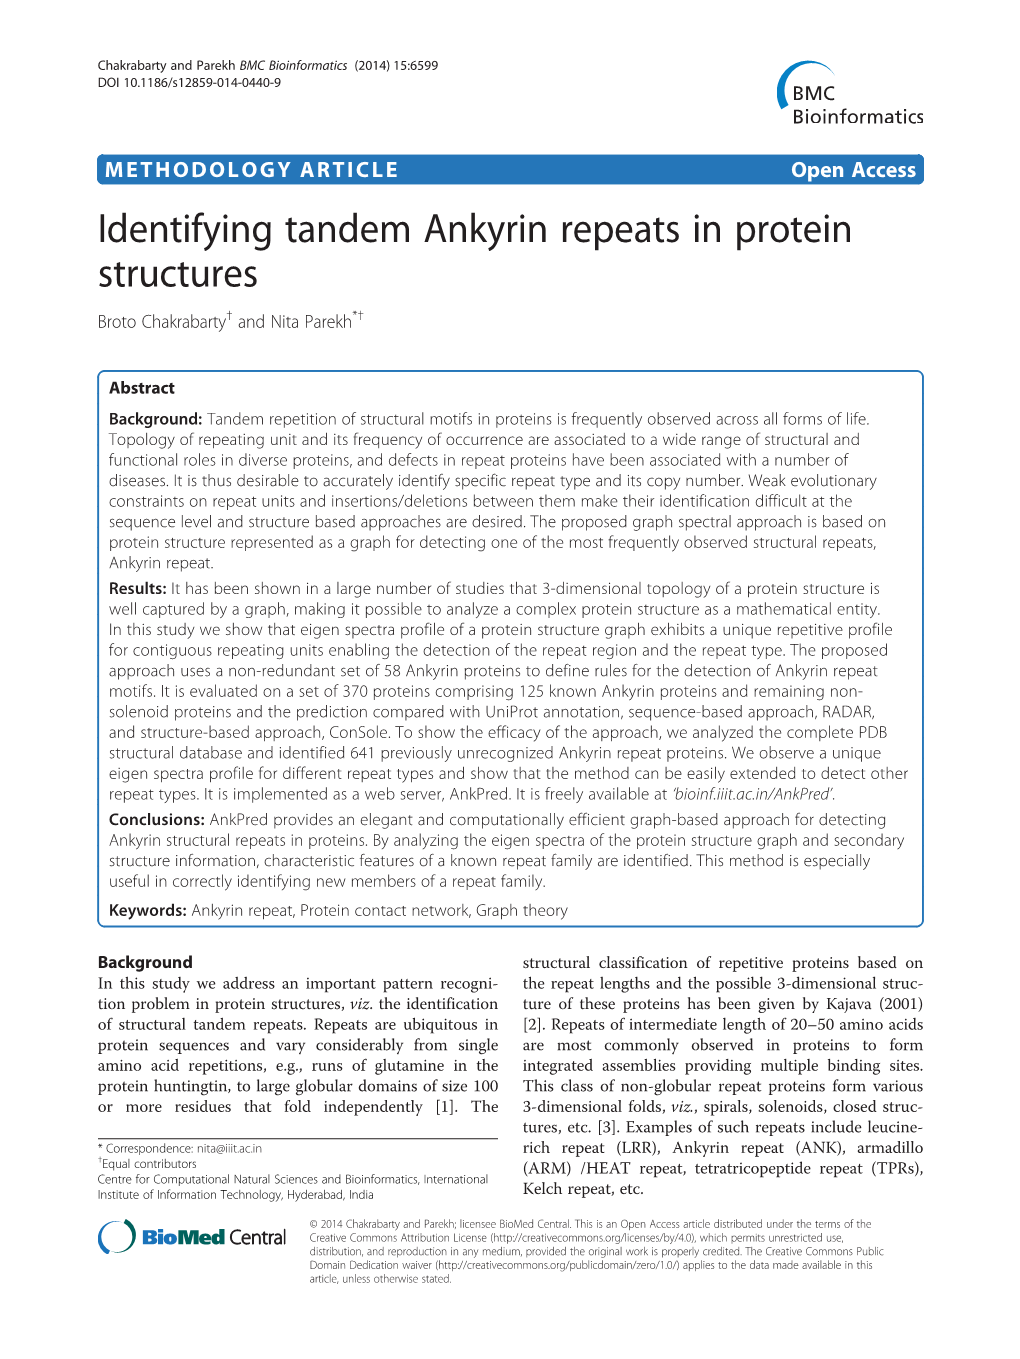 Identifying Tandem Ankyrin Repeats in Protein Structures Broto Chakrabarty† and Nita Parekh*†